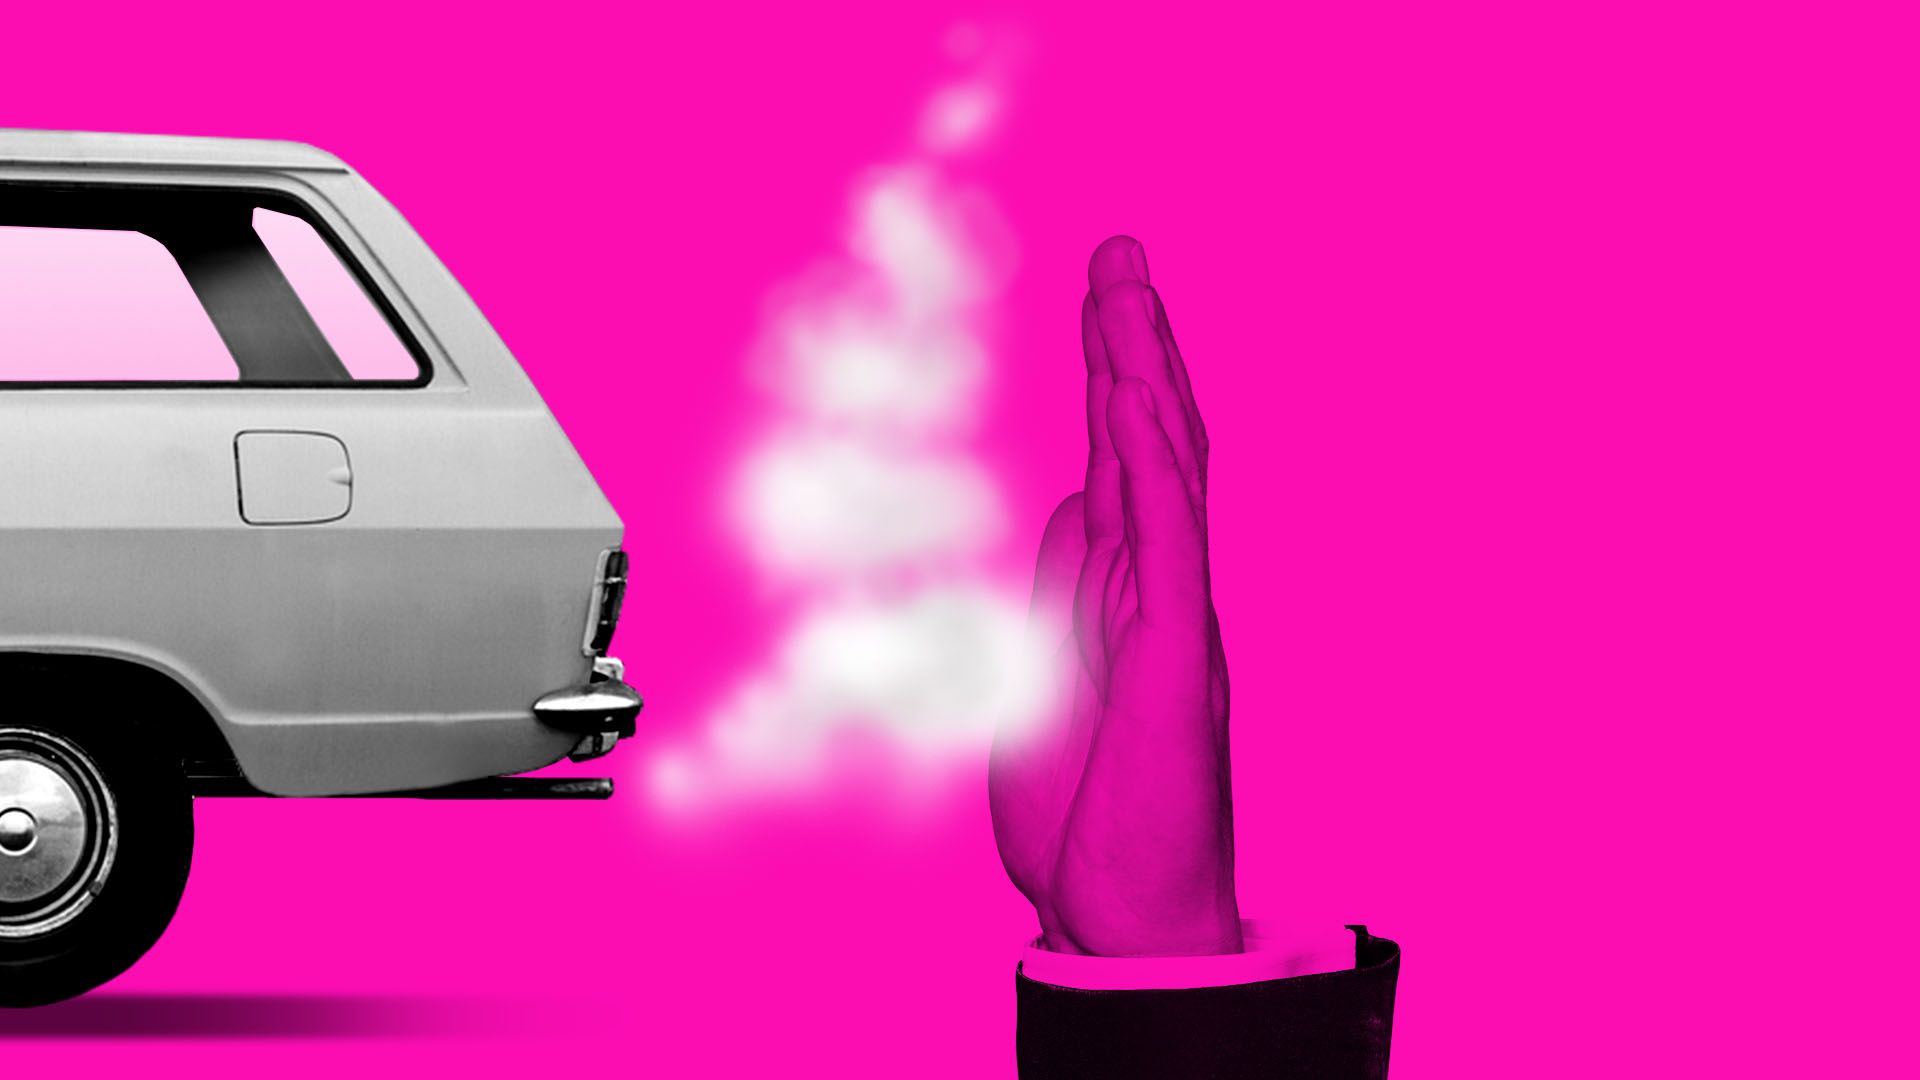  Illustration of exhaust from car tailpipe being stopped by a giant hand.